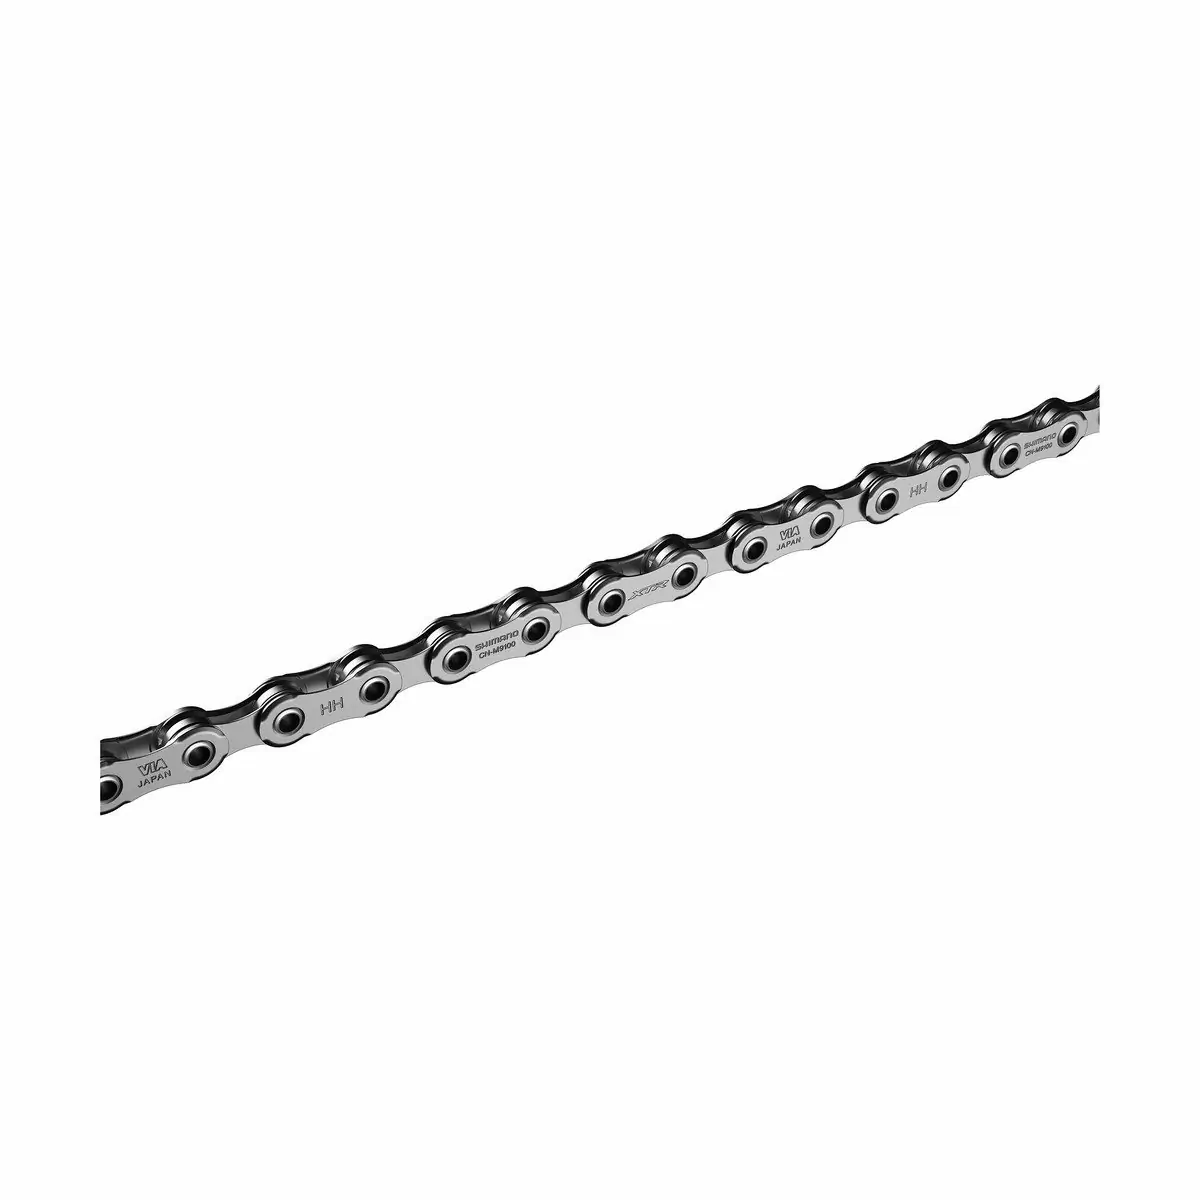 Chain XTR CN-M9100 11/12 speed Quick Link 138 links 2019 - image